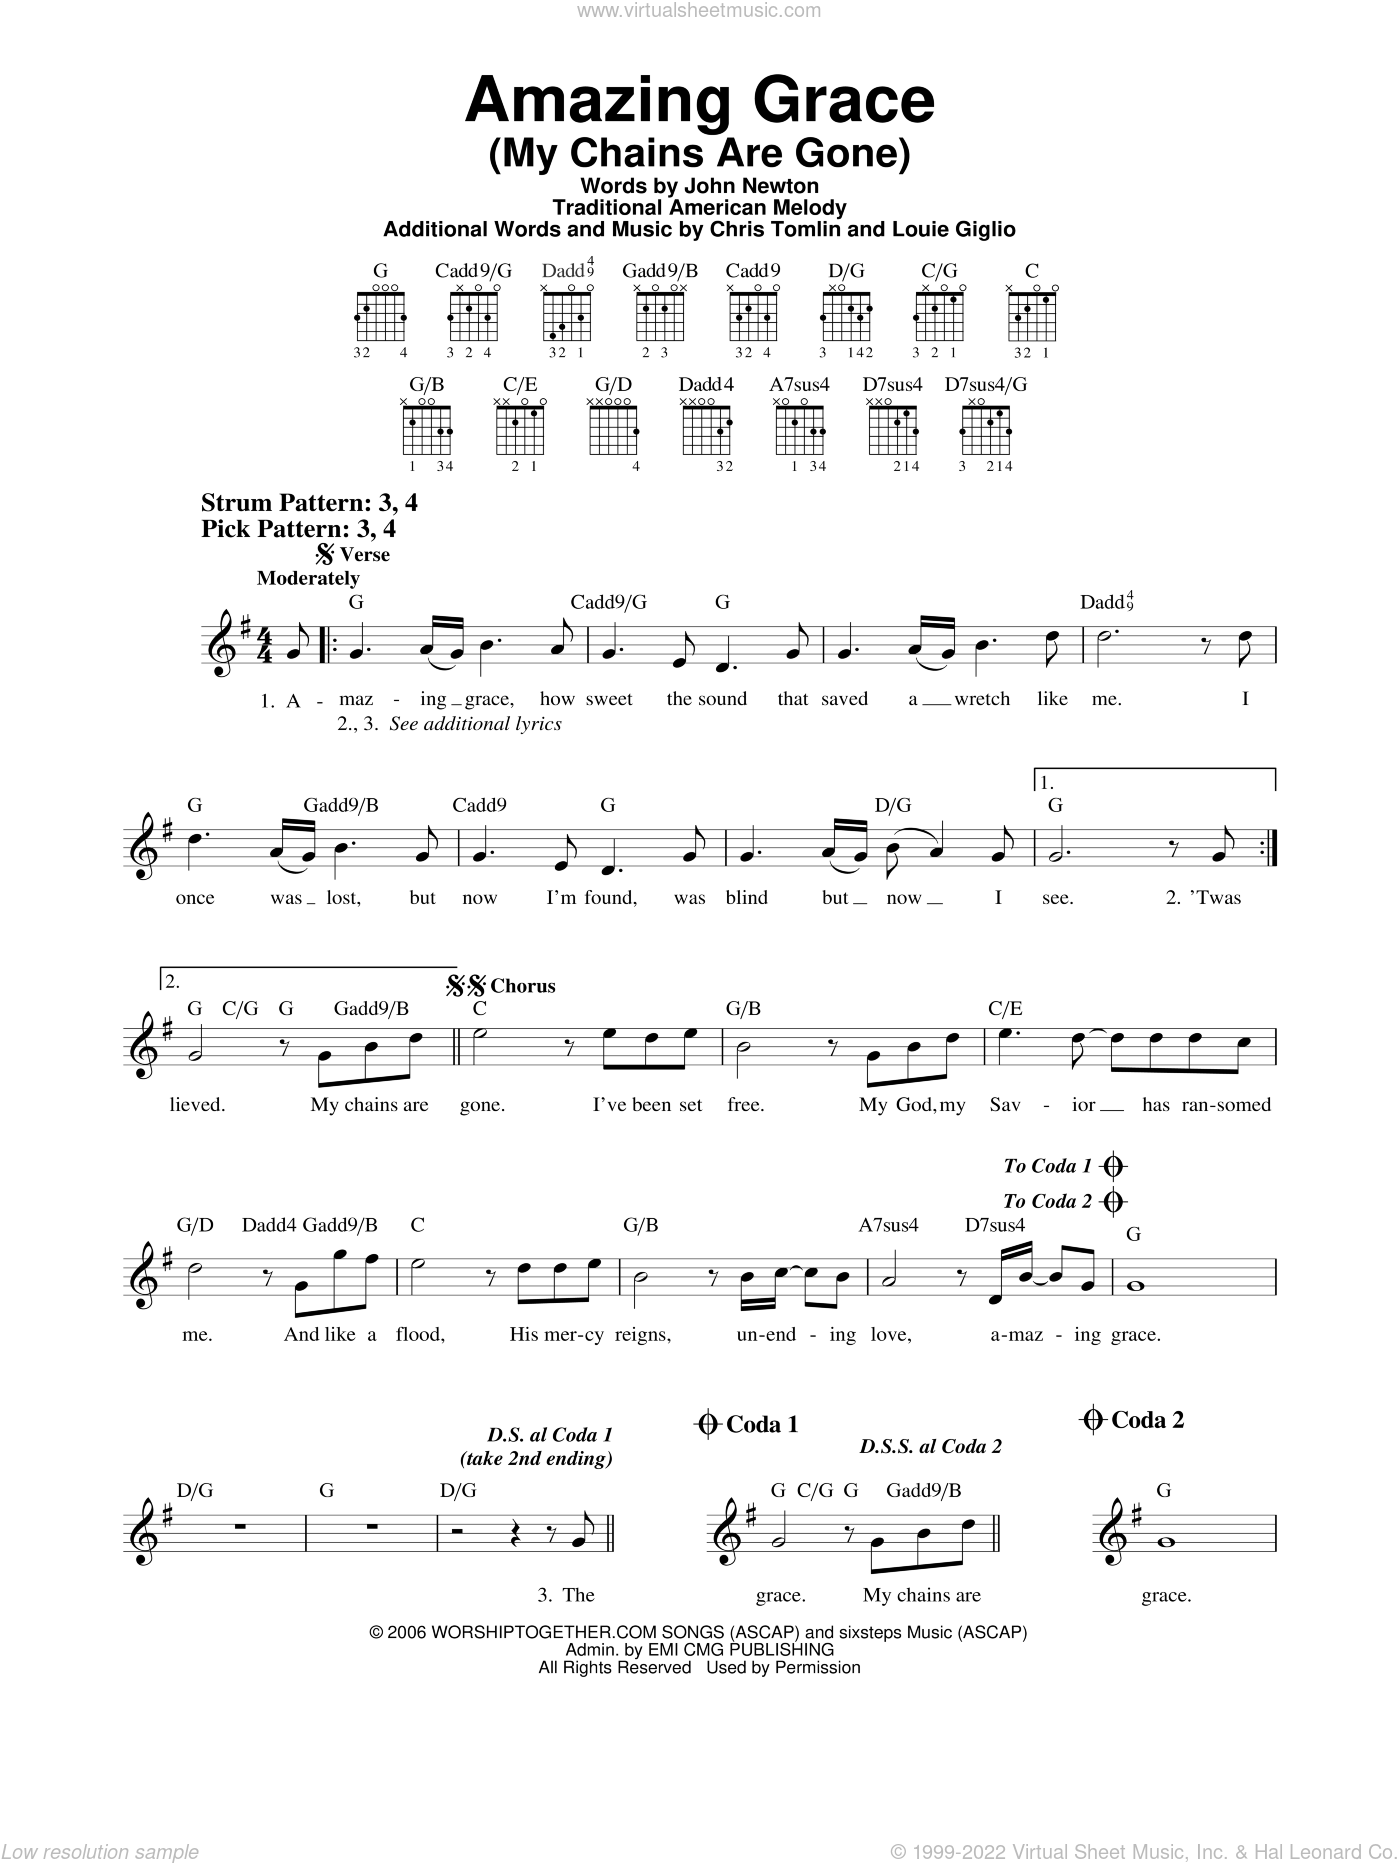 Tomlin - Amazing Grace (My Chains Are Gone) sheet music for guitar solo (chords)